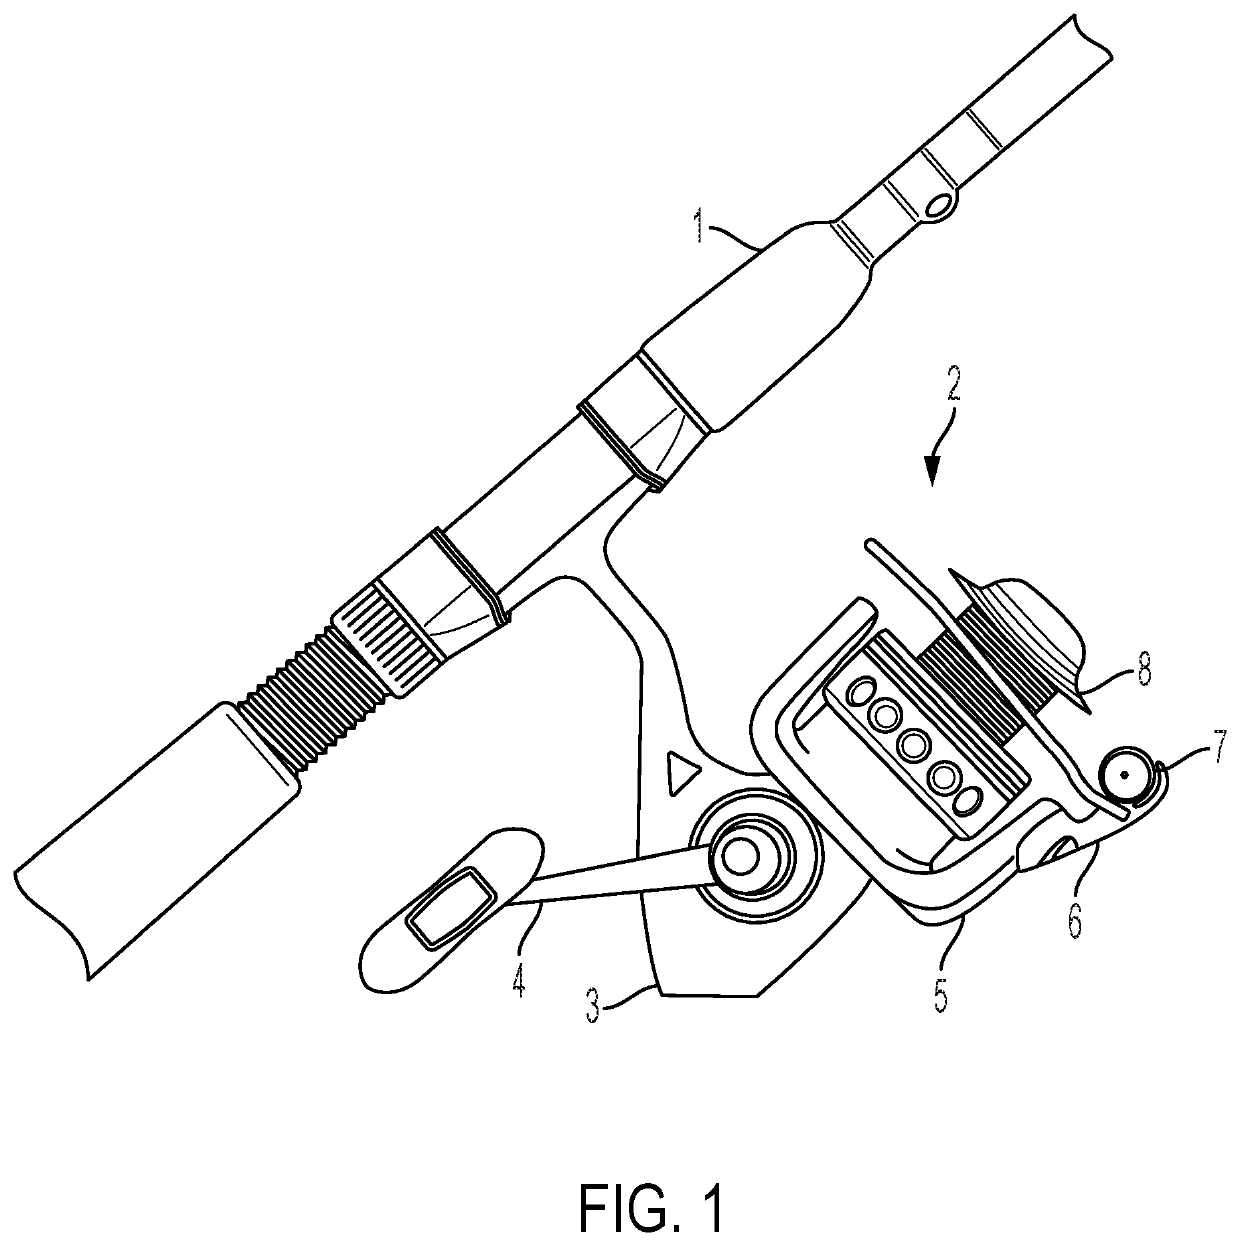 Spinning type fishing reel with bi-directionally rotating rotor and drag control to prevent line twist